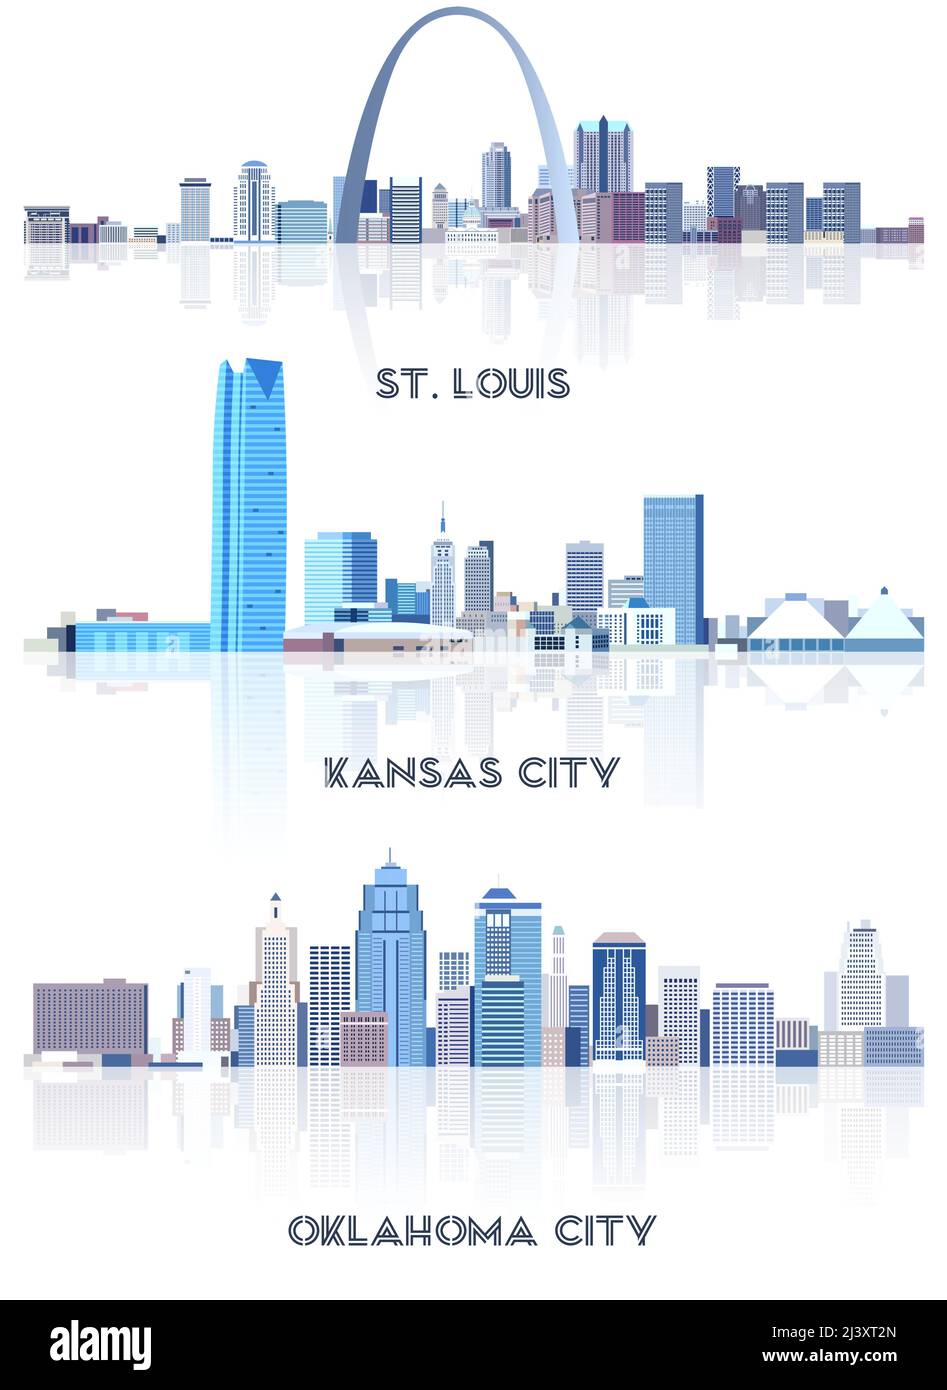 vector collection of United States cityscapes: St. Louis, Kansas City, Oklahoma City skylines in tints of blue color palette. Сrystal aesthetics style Stock Vector